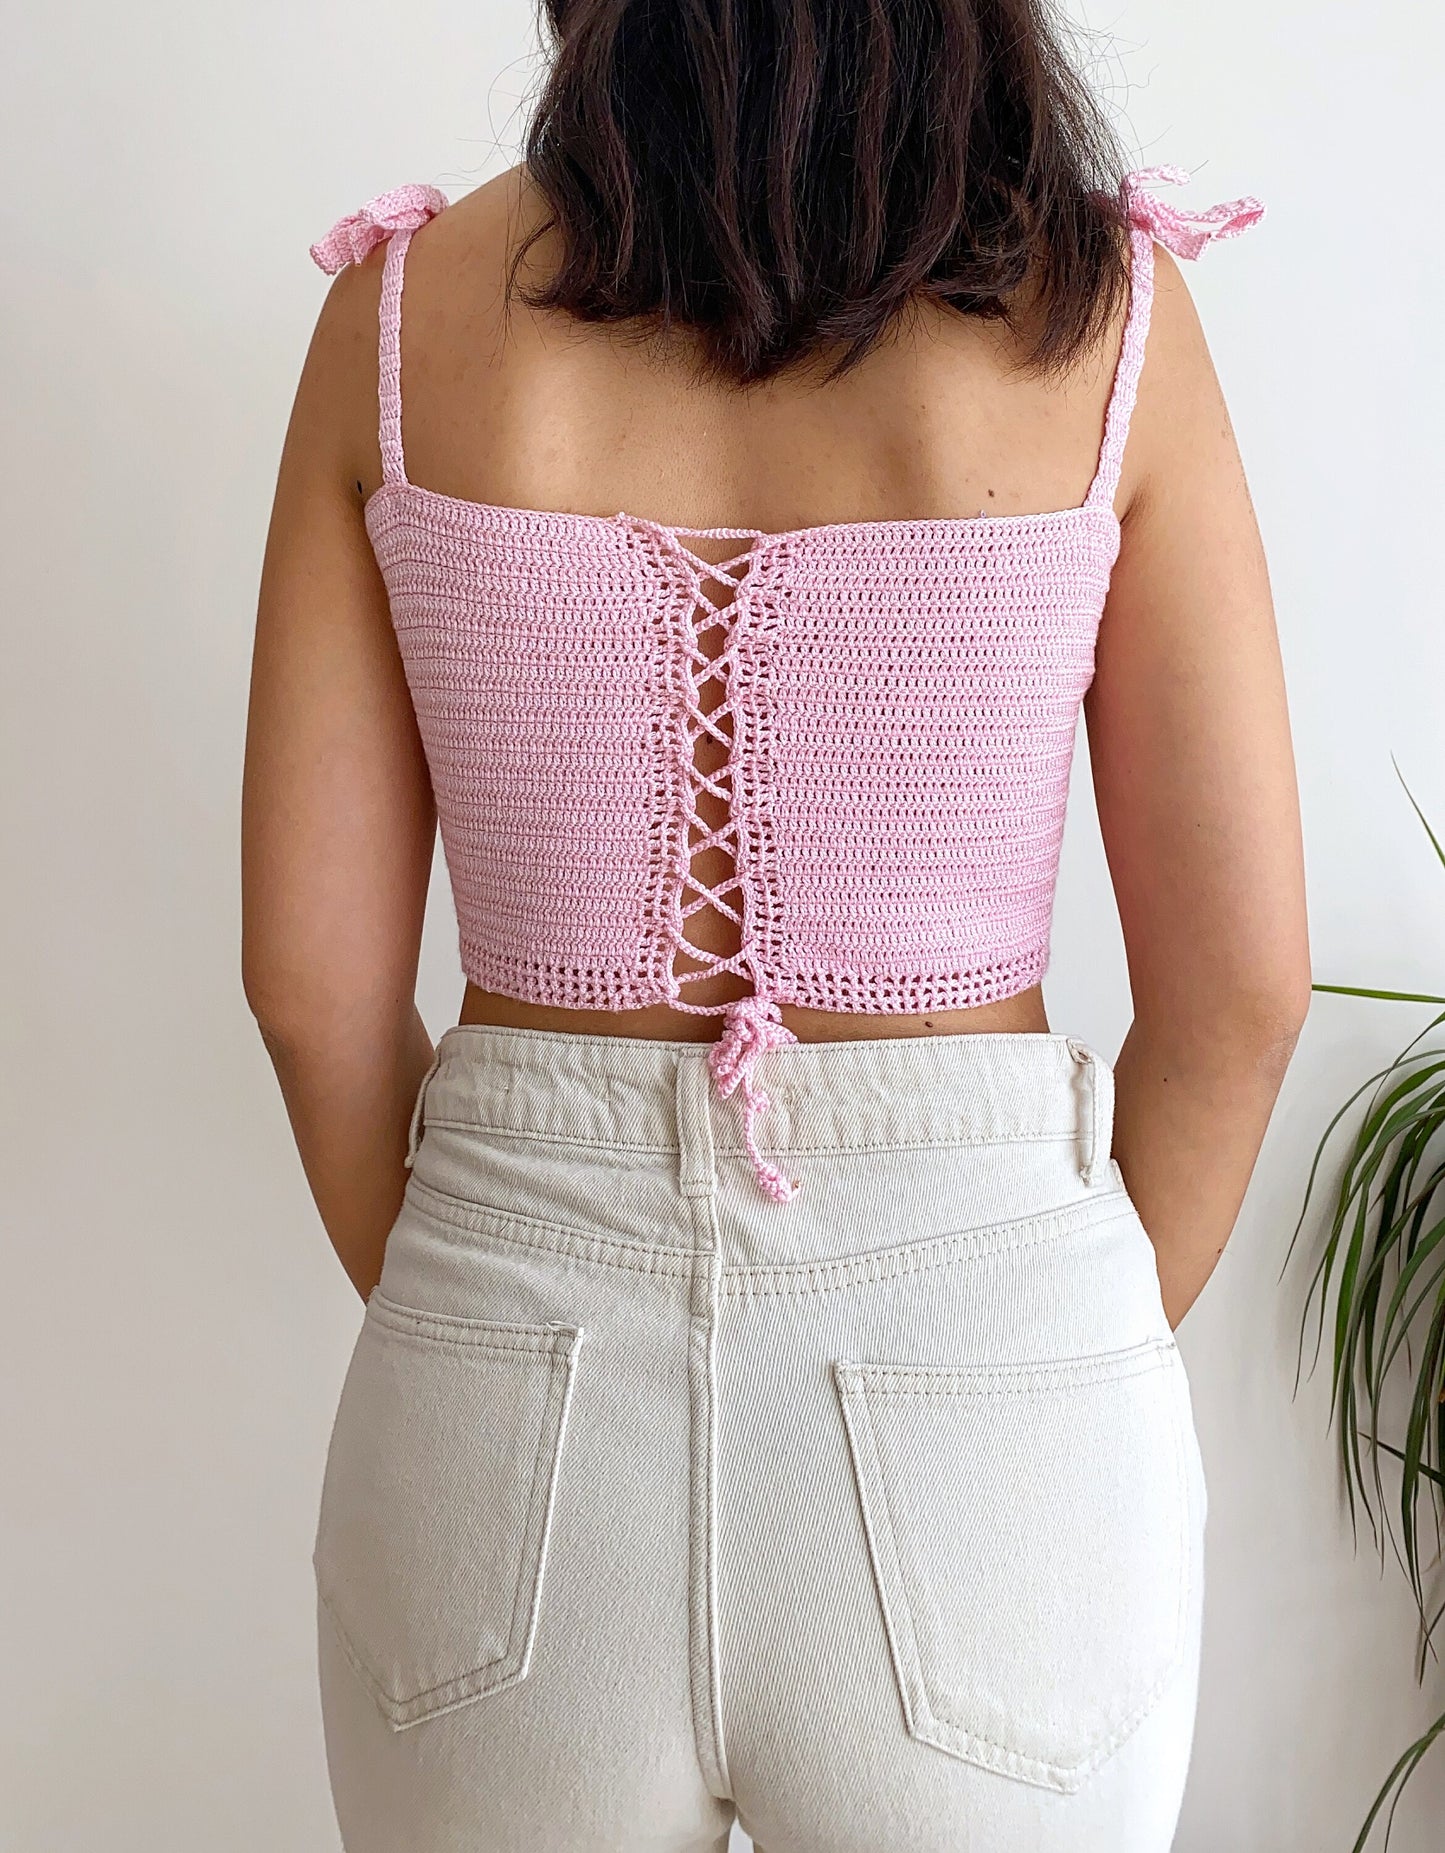 Candy Pink Crochet Top with Clouds